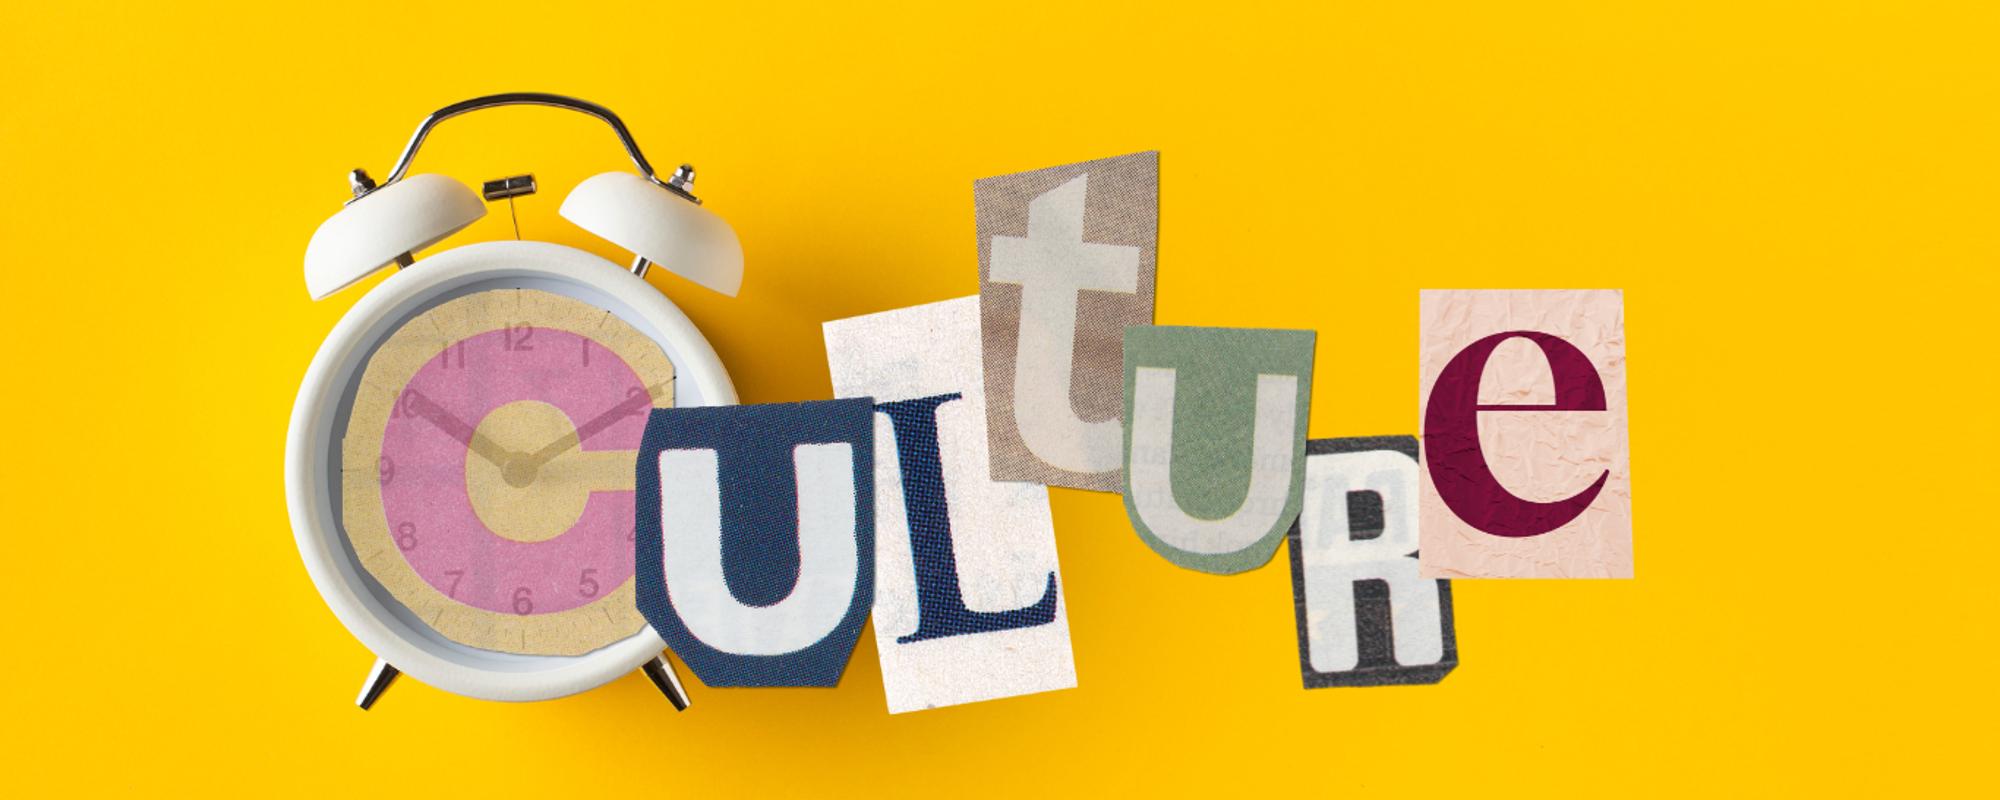 How can organisational culture be managed and adapted over time?